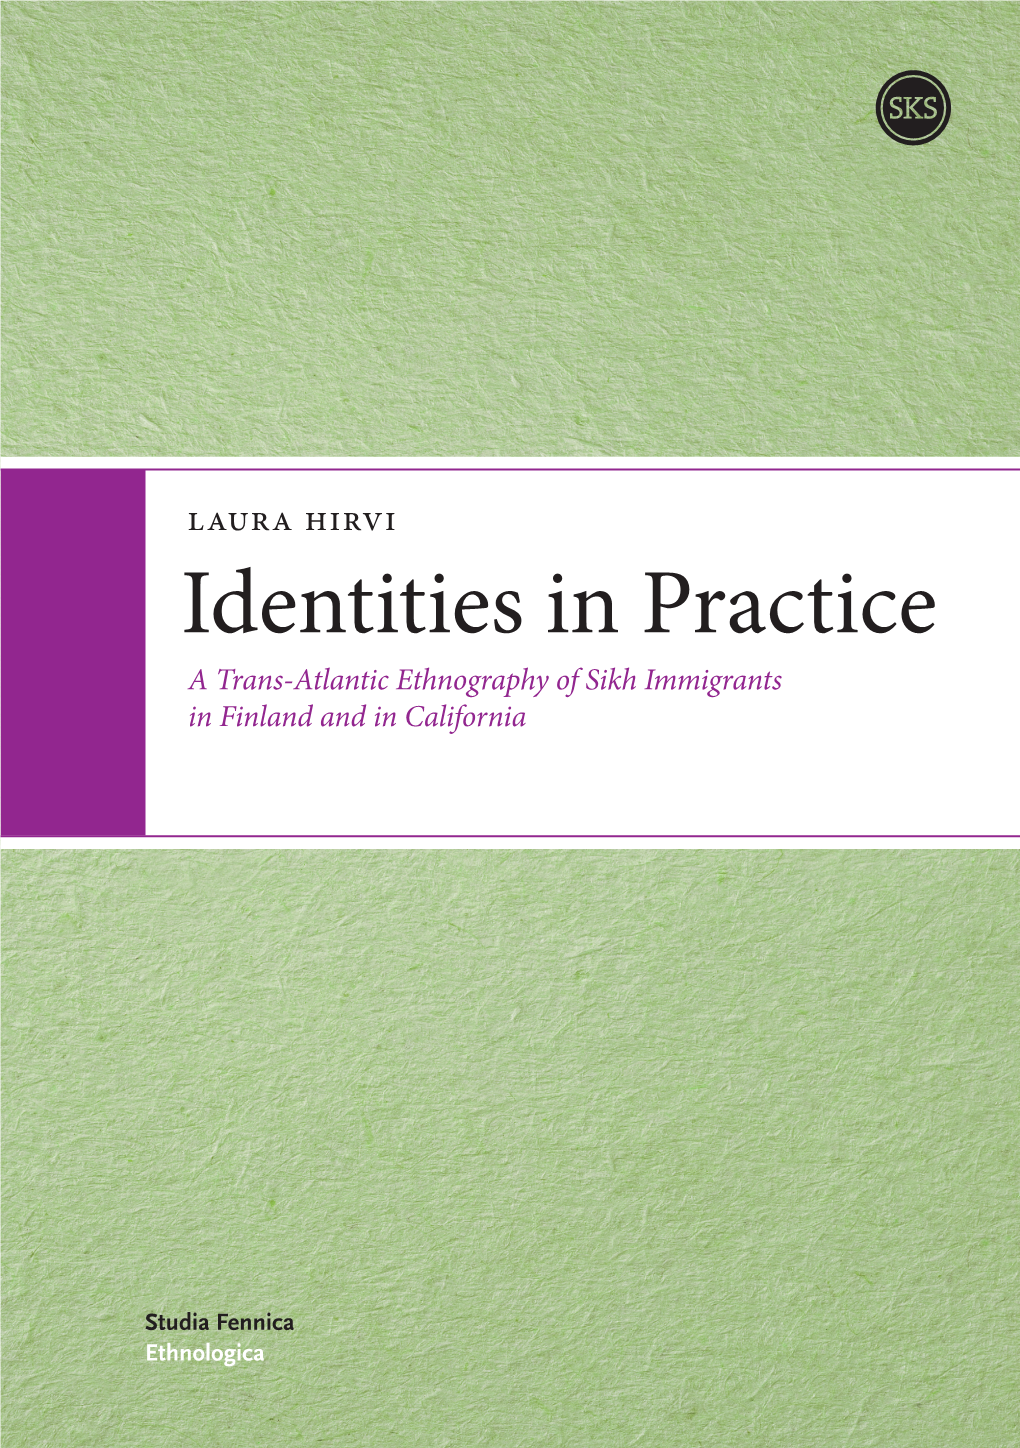 Identities in Practice a Trans-Atlantic Ethnography of Sikh Immigrants in Finland and in California